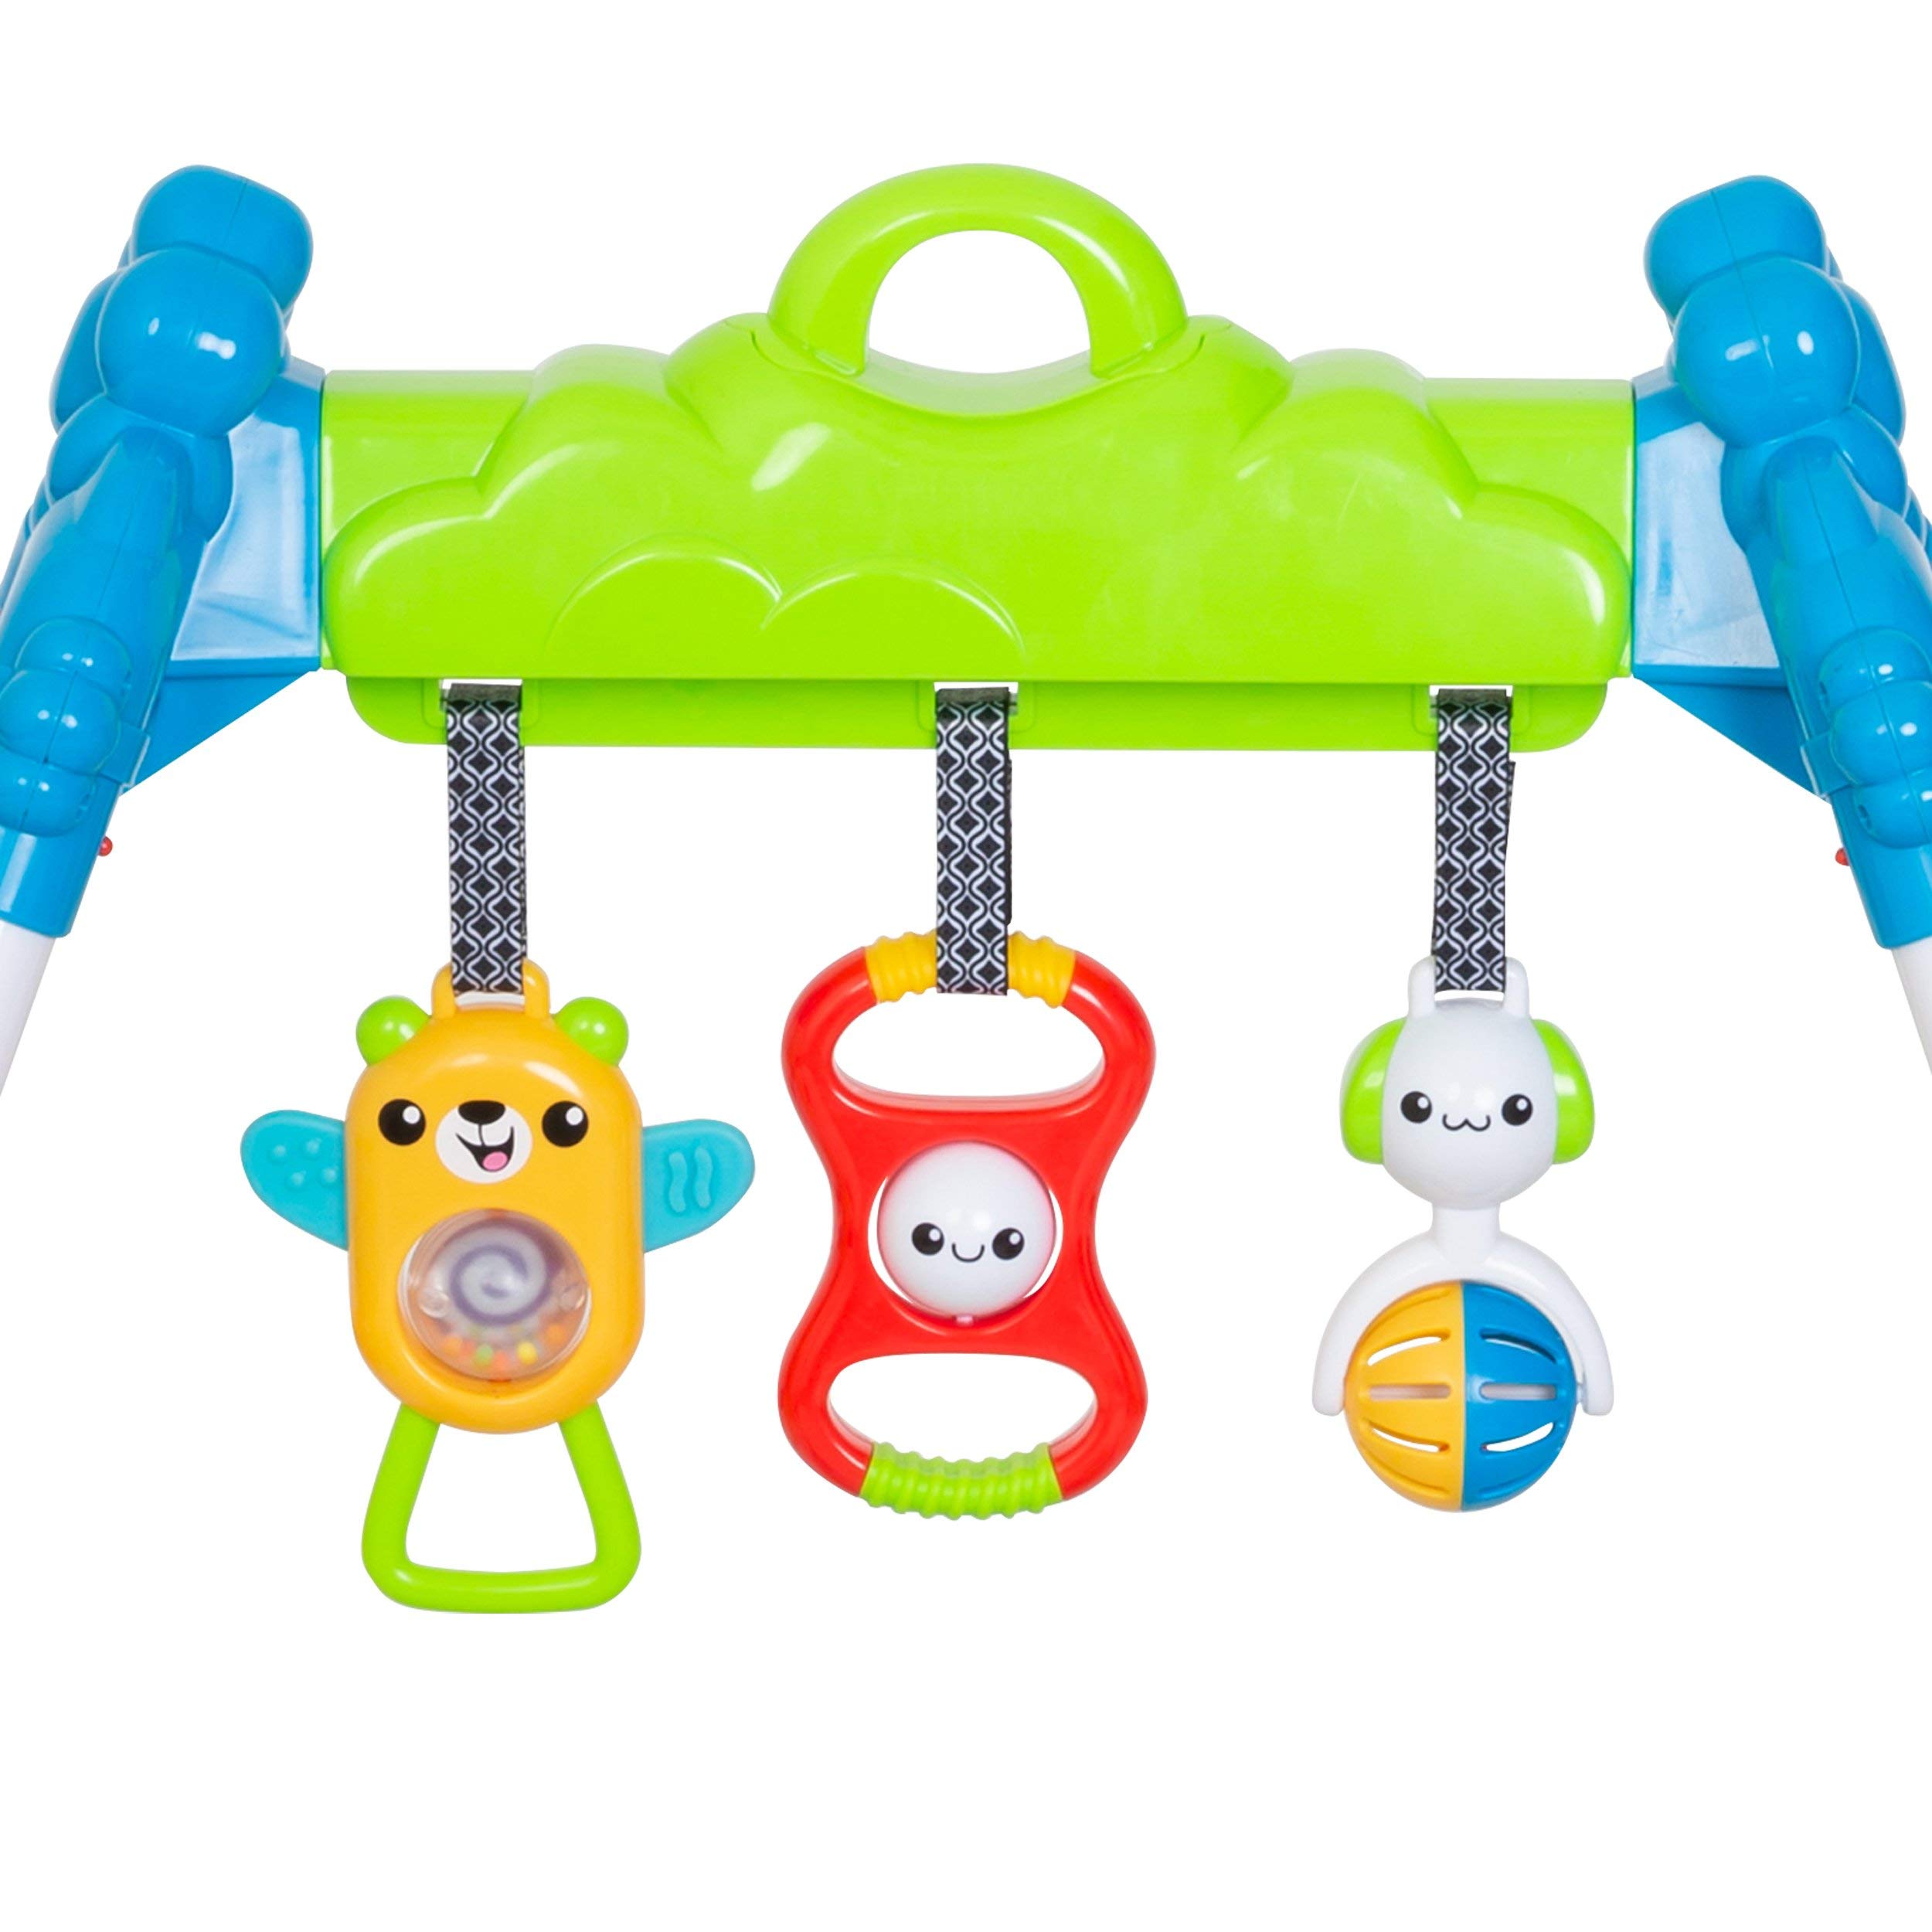 SMART STEPS by baby trend STEM Jammin’ Gym with Play Mat